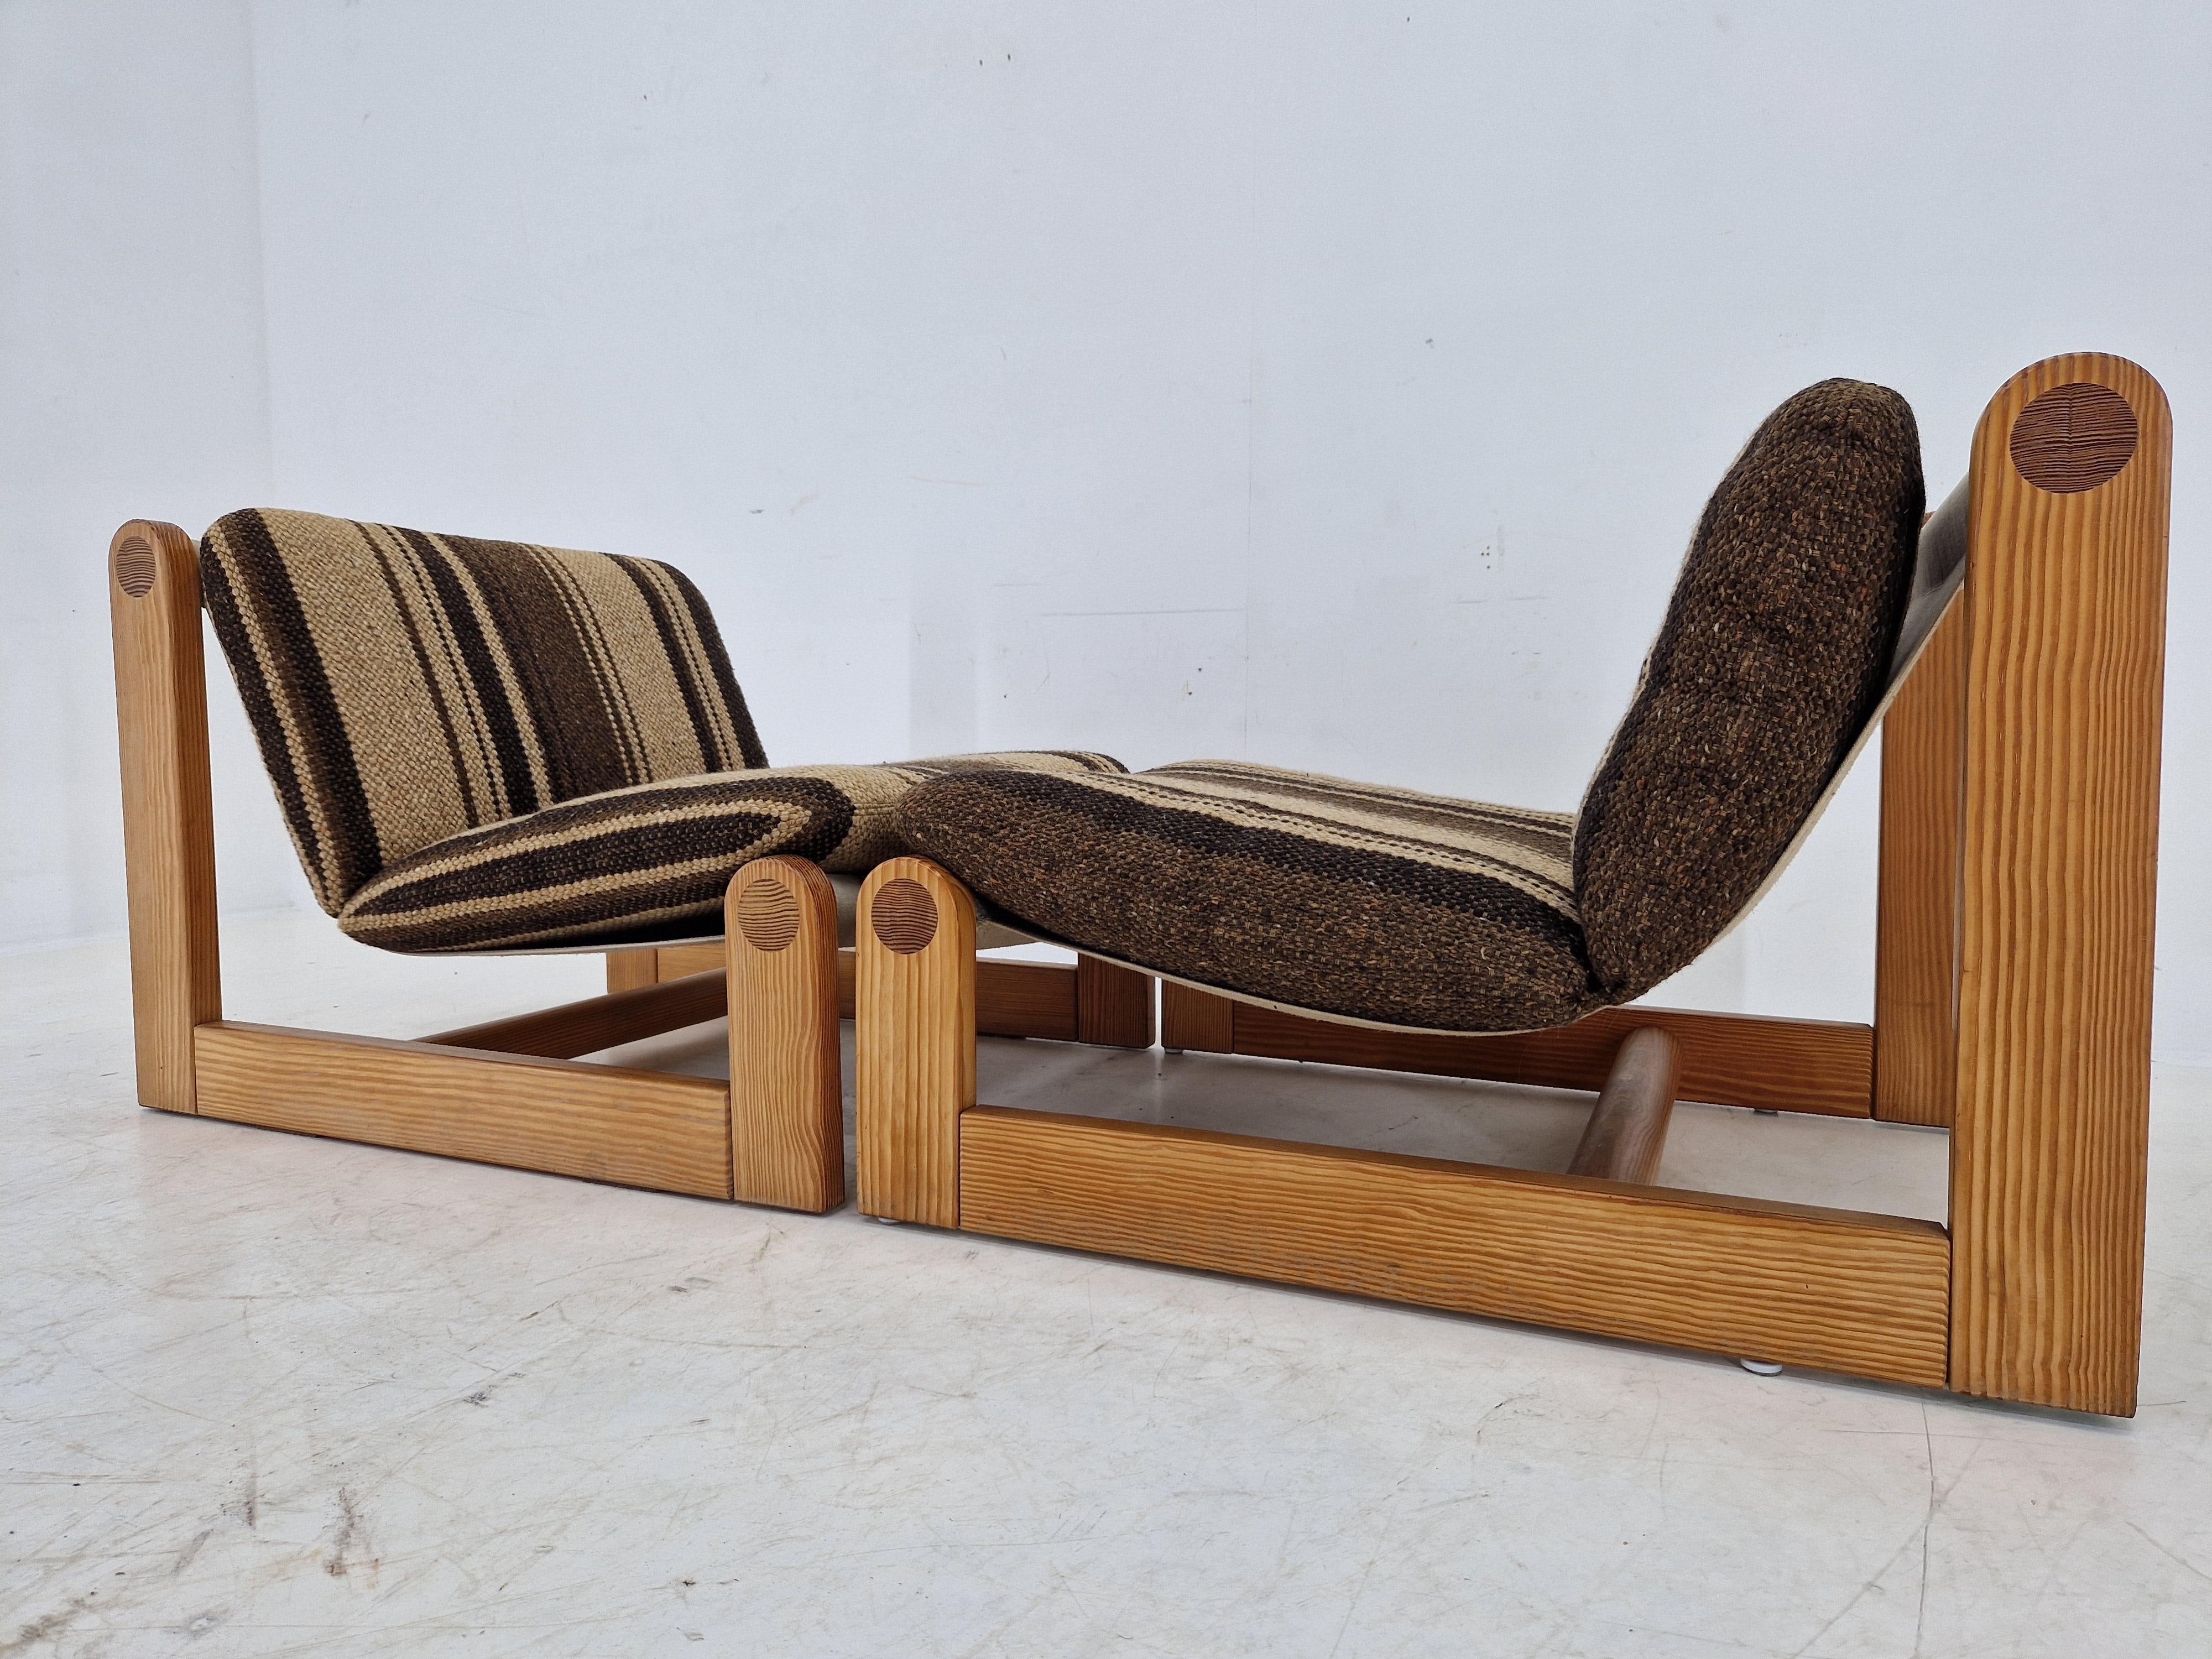 Fabric Pair of Midcentury Rare Lounge Chairs Pine Wood, Denmark, 1960s For Sale